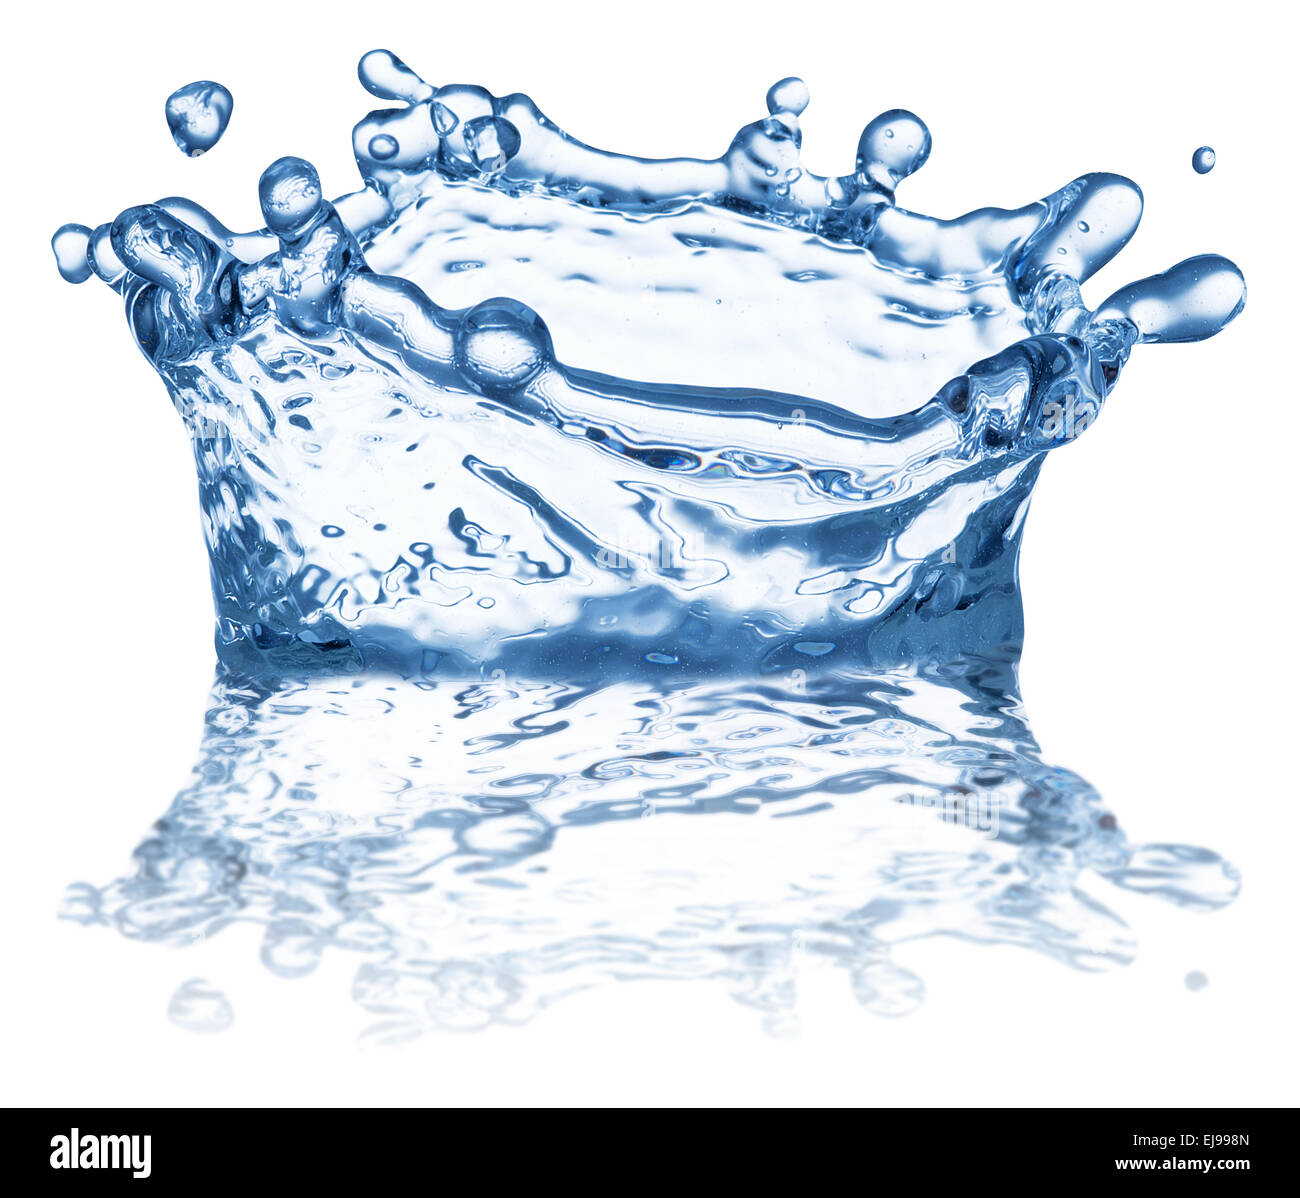 Splash of water in the shape of crown. File contains clipping paths. Stock Photo